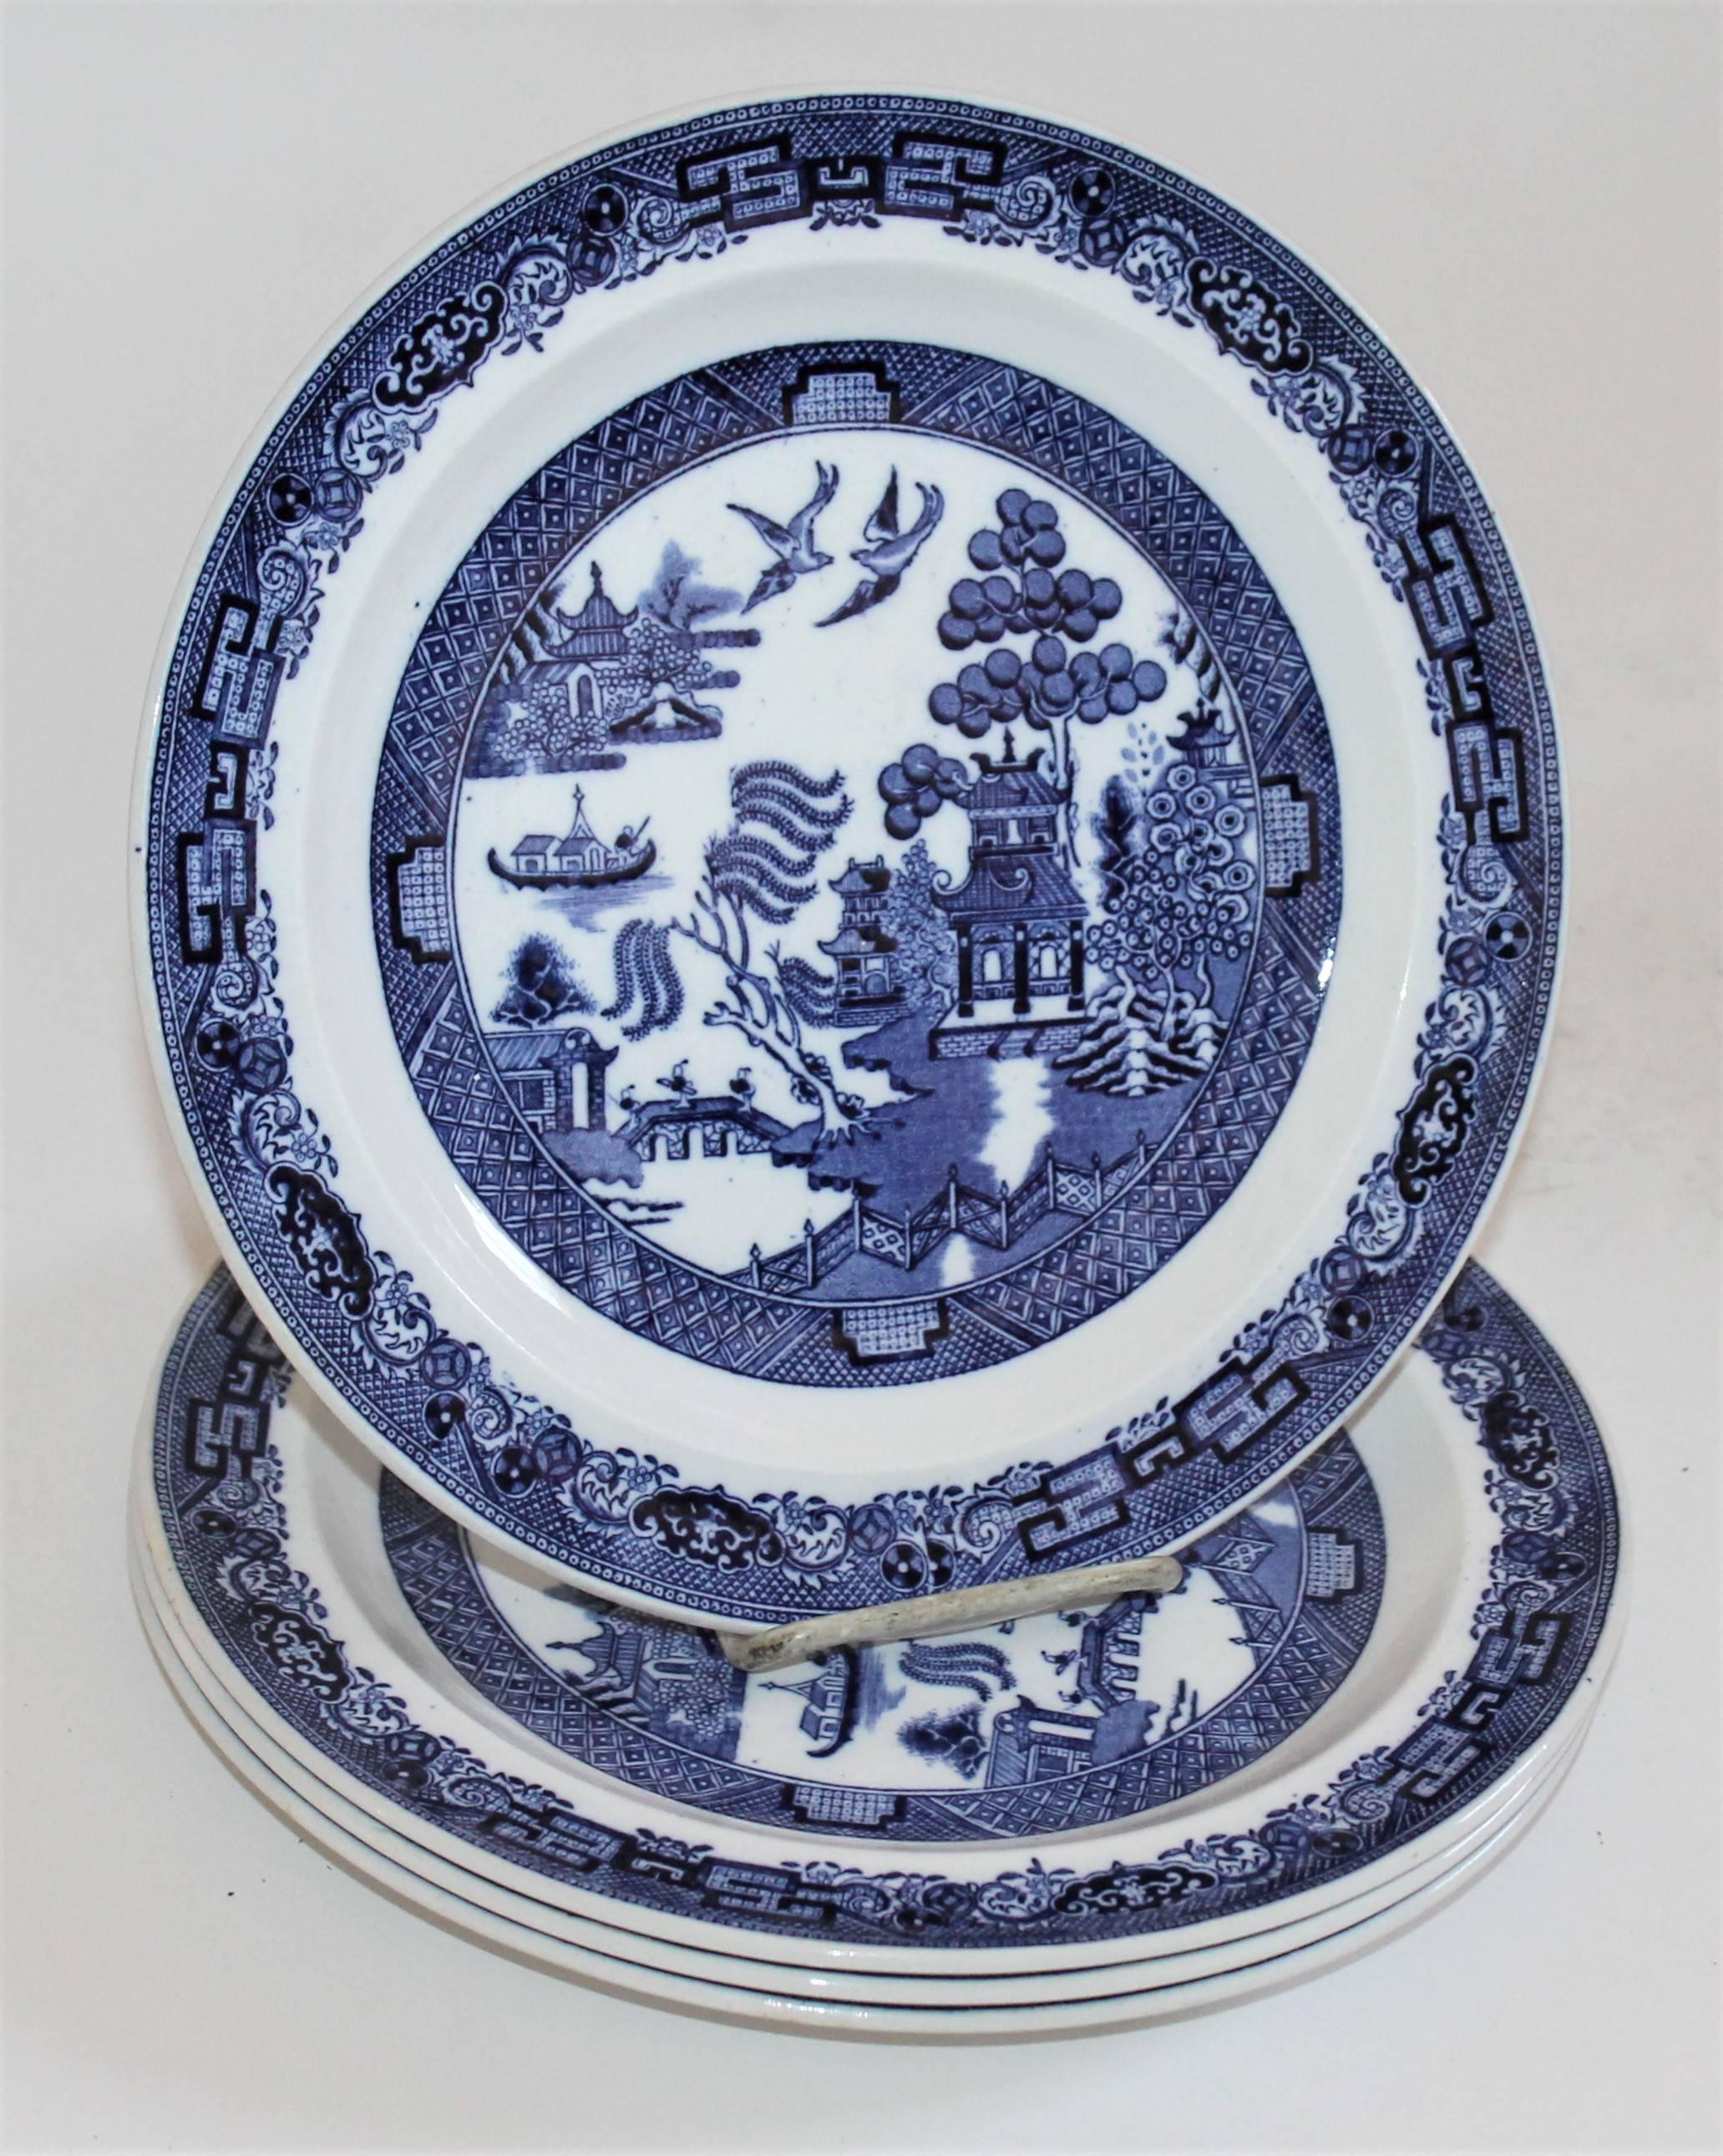 Pristine set of four blue willow platters in amazing condition. 
This specific insignia was only used for a number of year starting circa 1840 up to circa 1870s for a short period and only found on high-quality goods made by Wedgewood. These plates